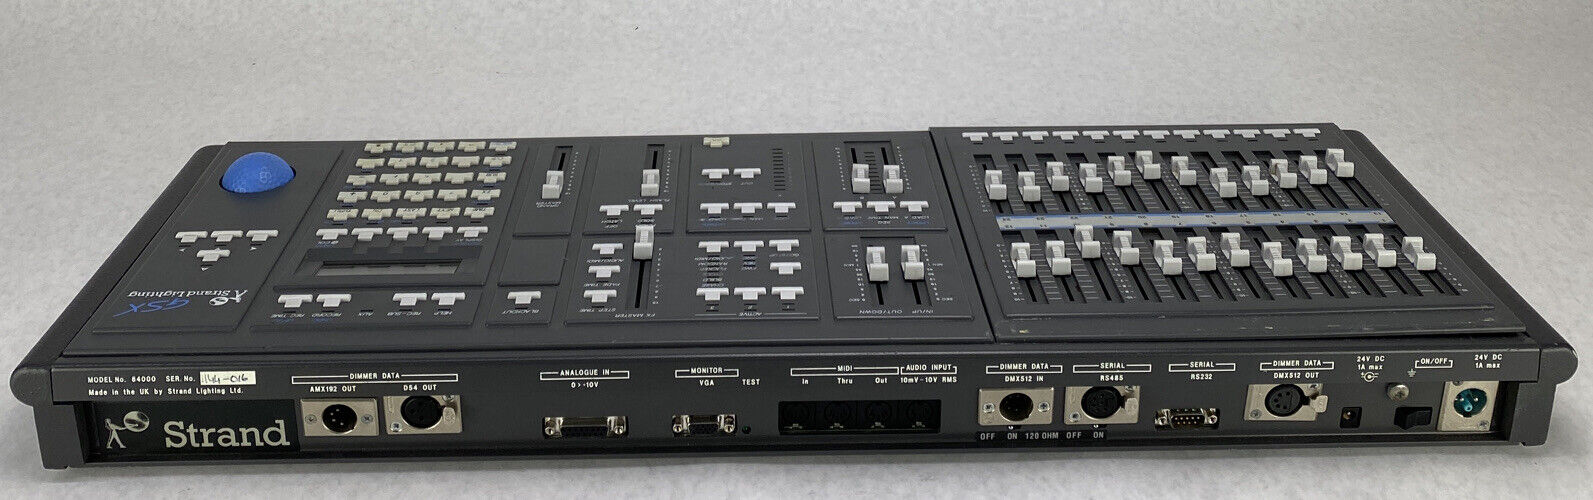 Strand Lighting GSX 64000 125 Channel Console NO POWER SUPPLY